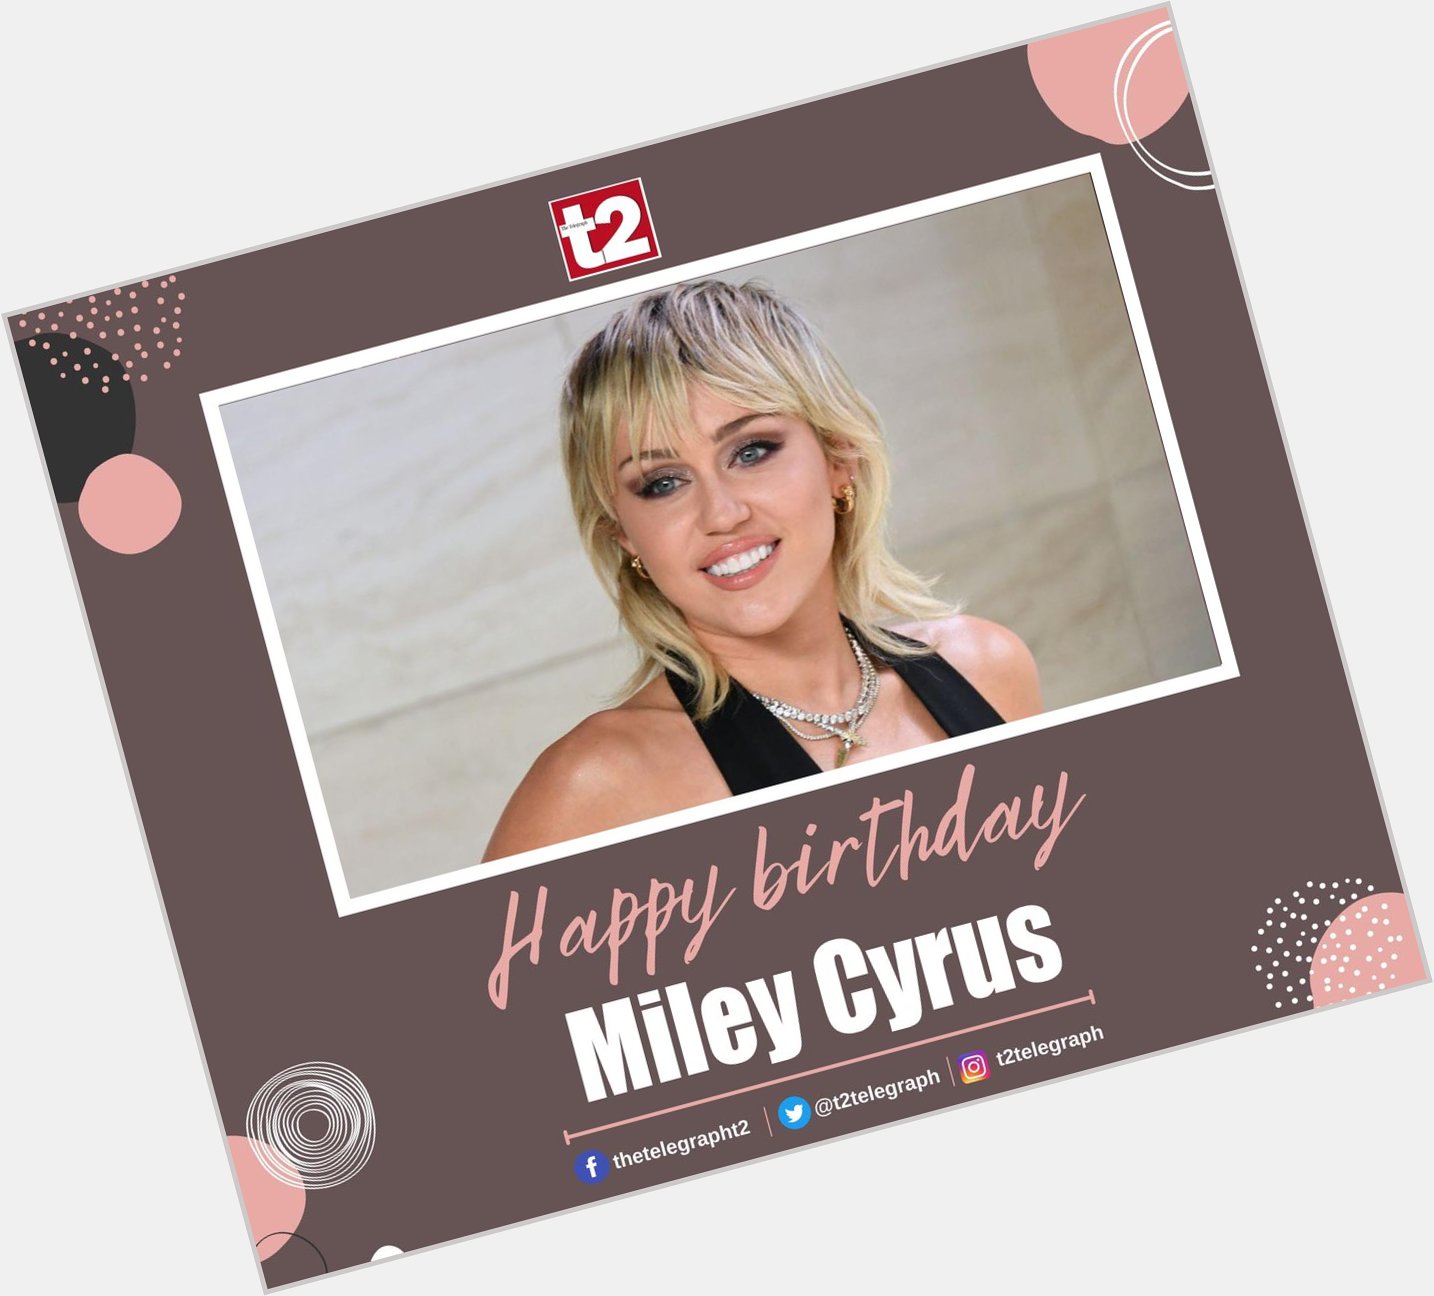 Happy birthday Miley Cyrus and thanks for all the energetic power pop 